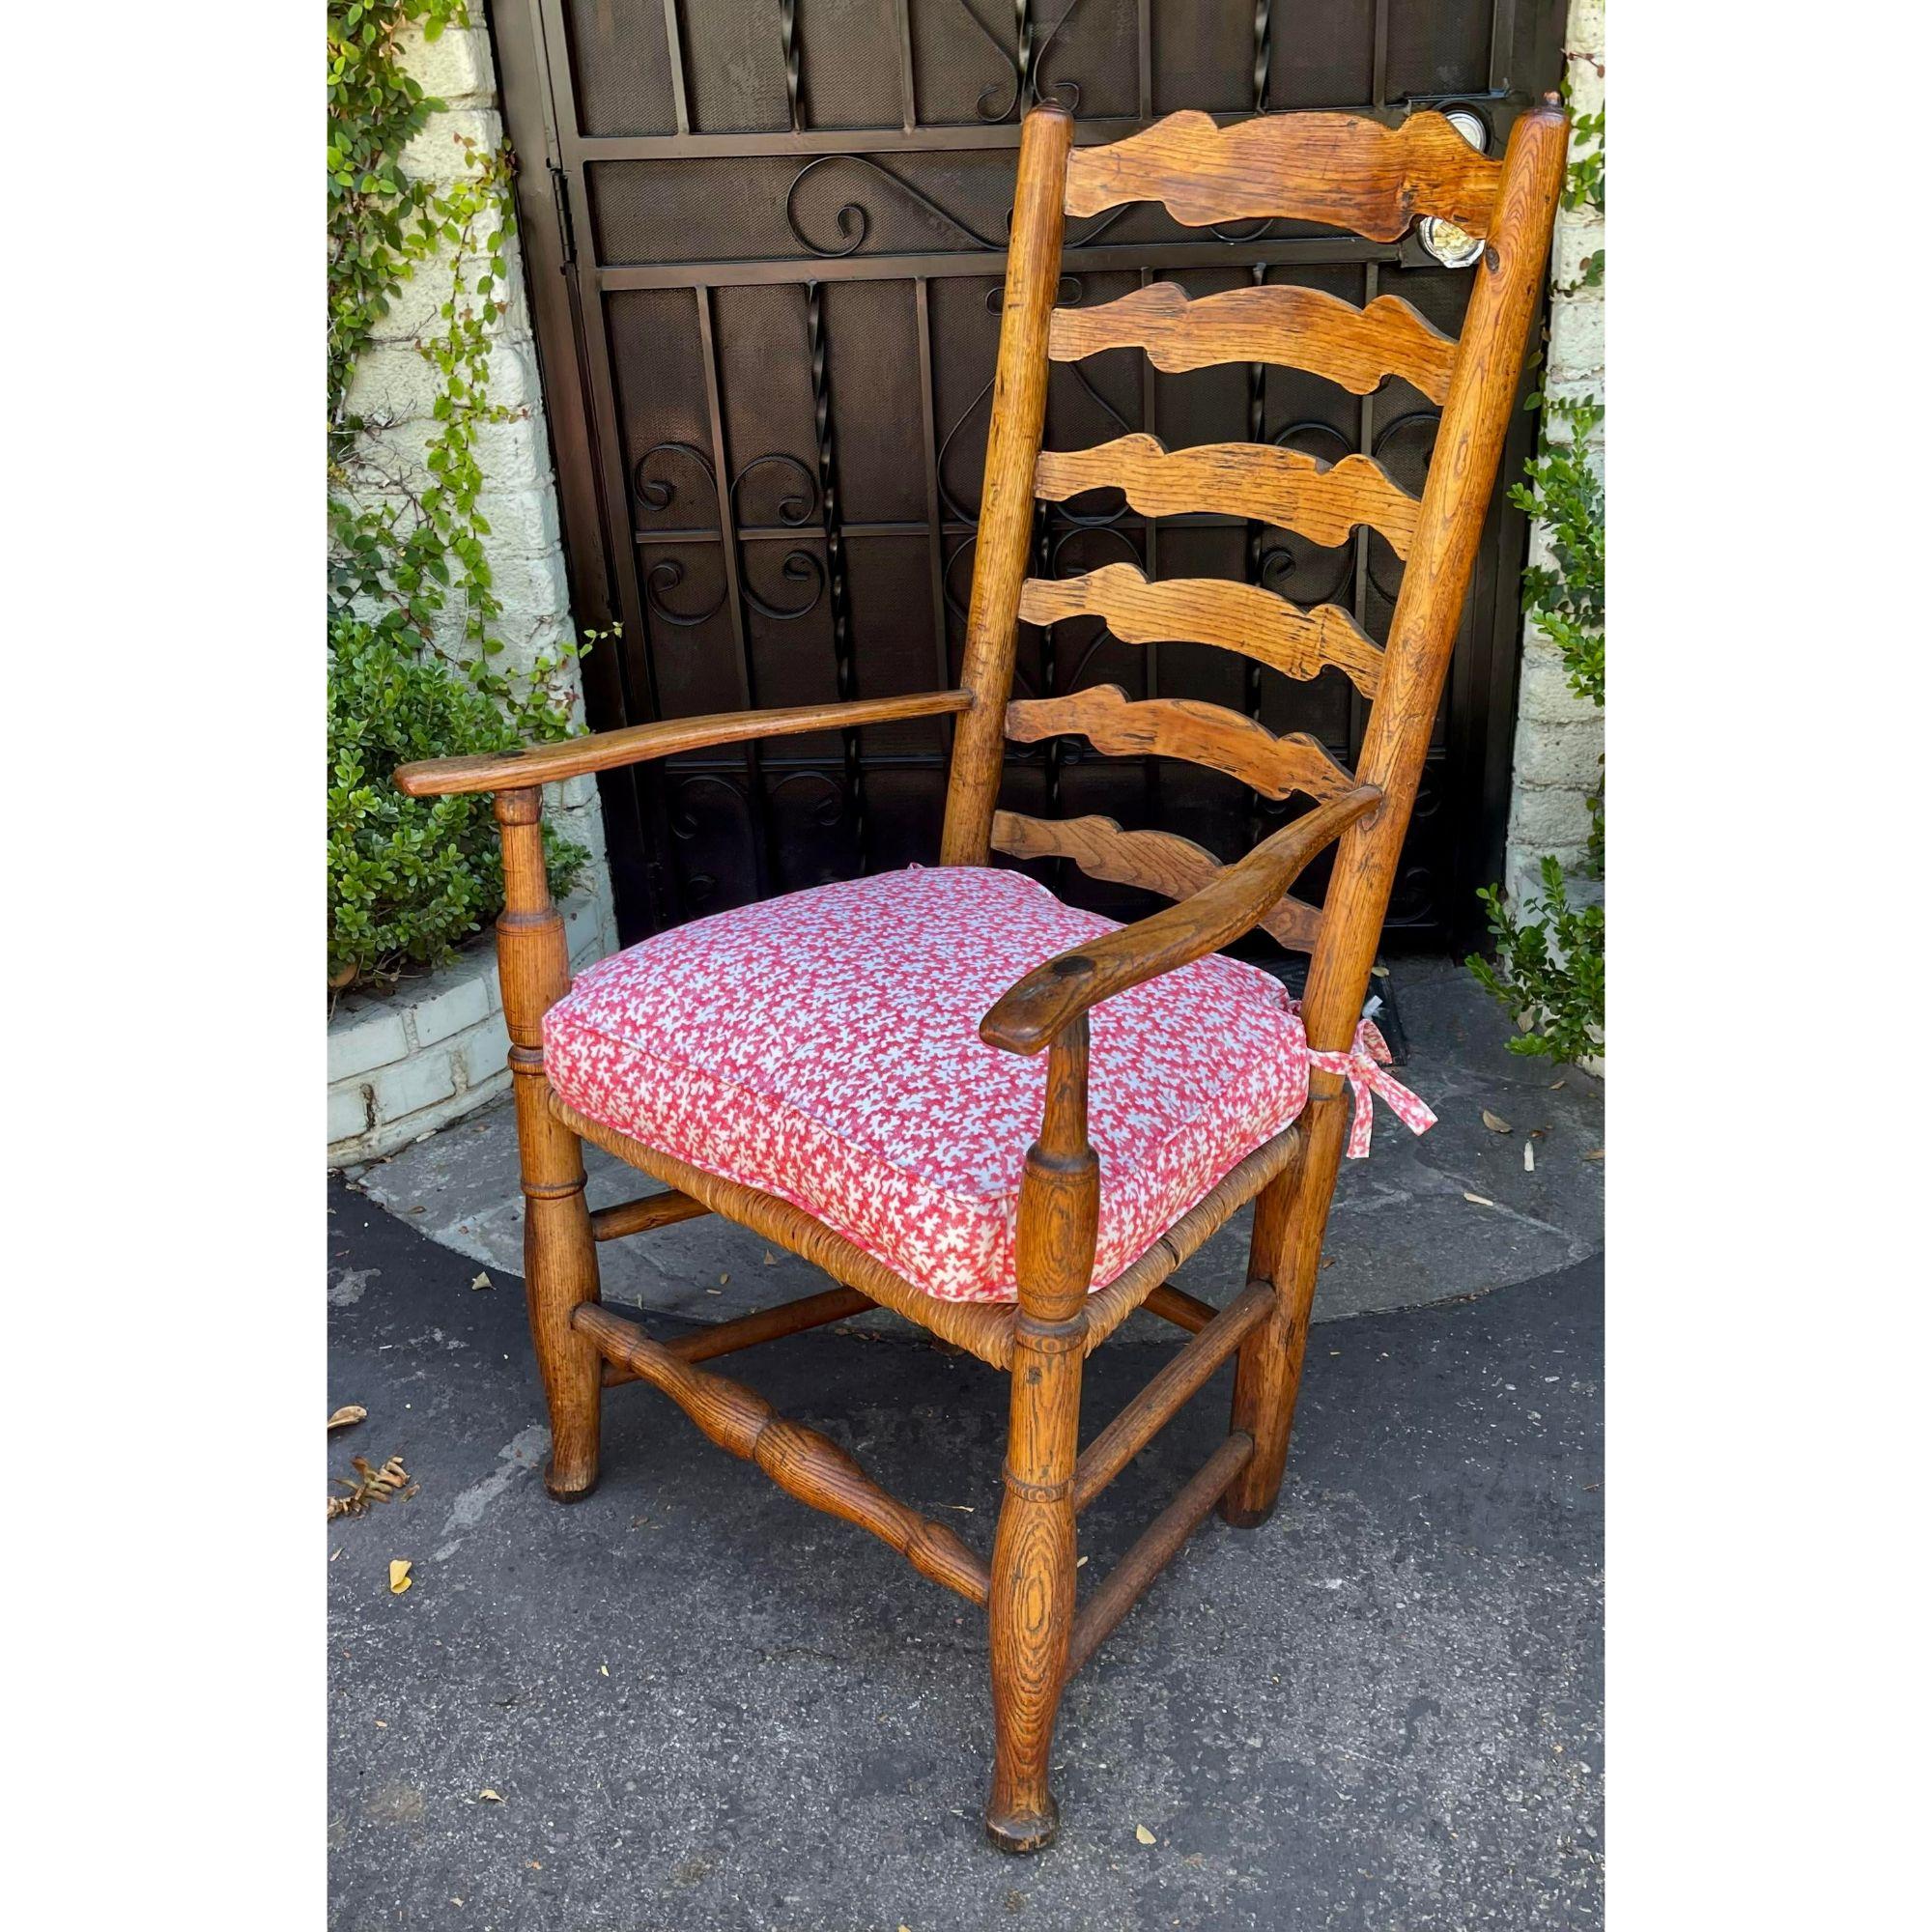 Priced Each.
Antique 18th century American Ladder Back armchair with Scalamandre Down Cushion

Additional information: 
Materials: Cotton, Feather, Oak, Rush
Color: Pink
Period: 18th century
Styles: American
Number of Seats: 1 
Item Type: